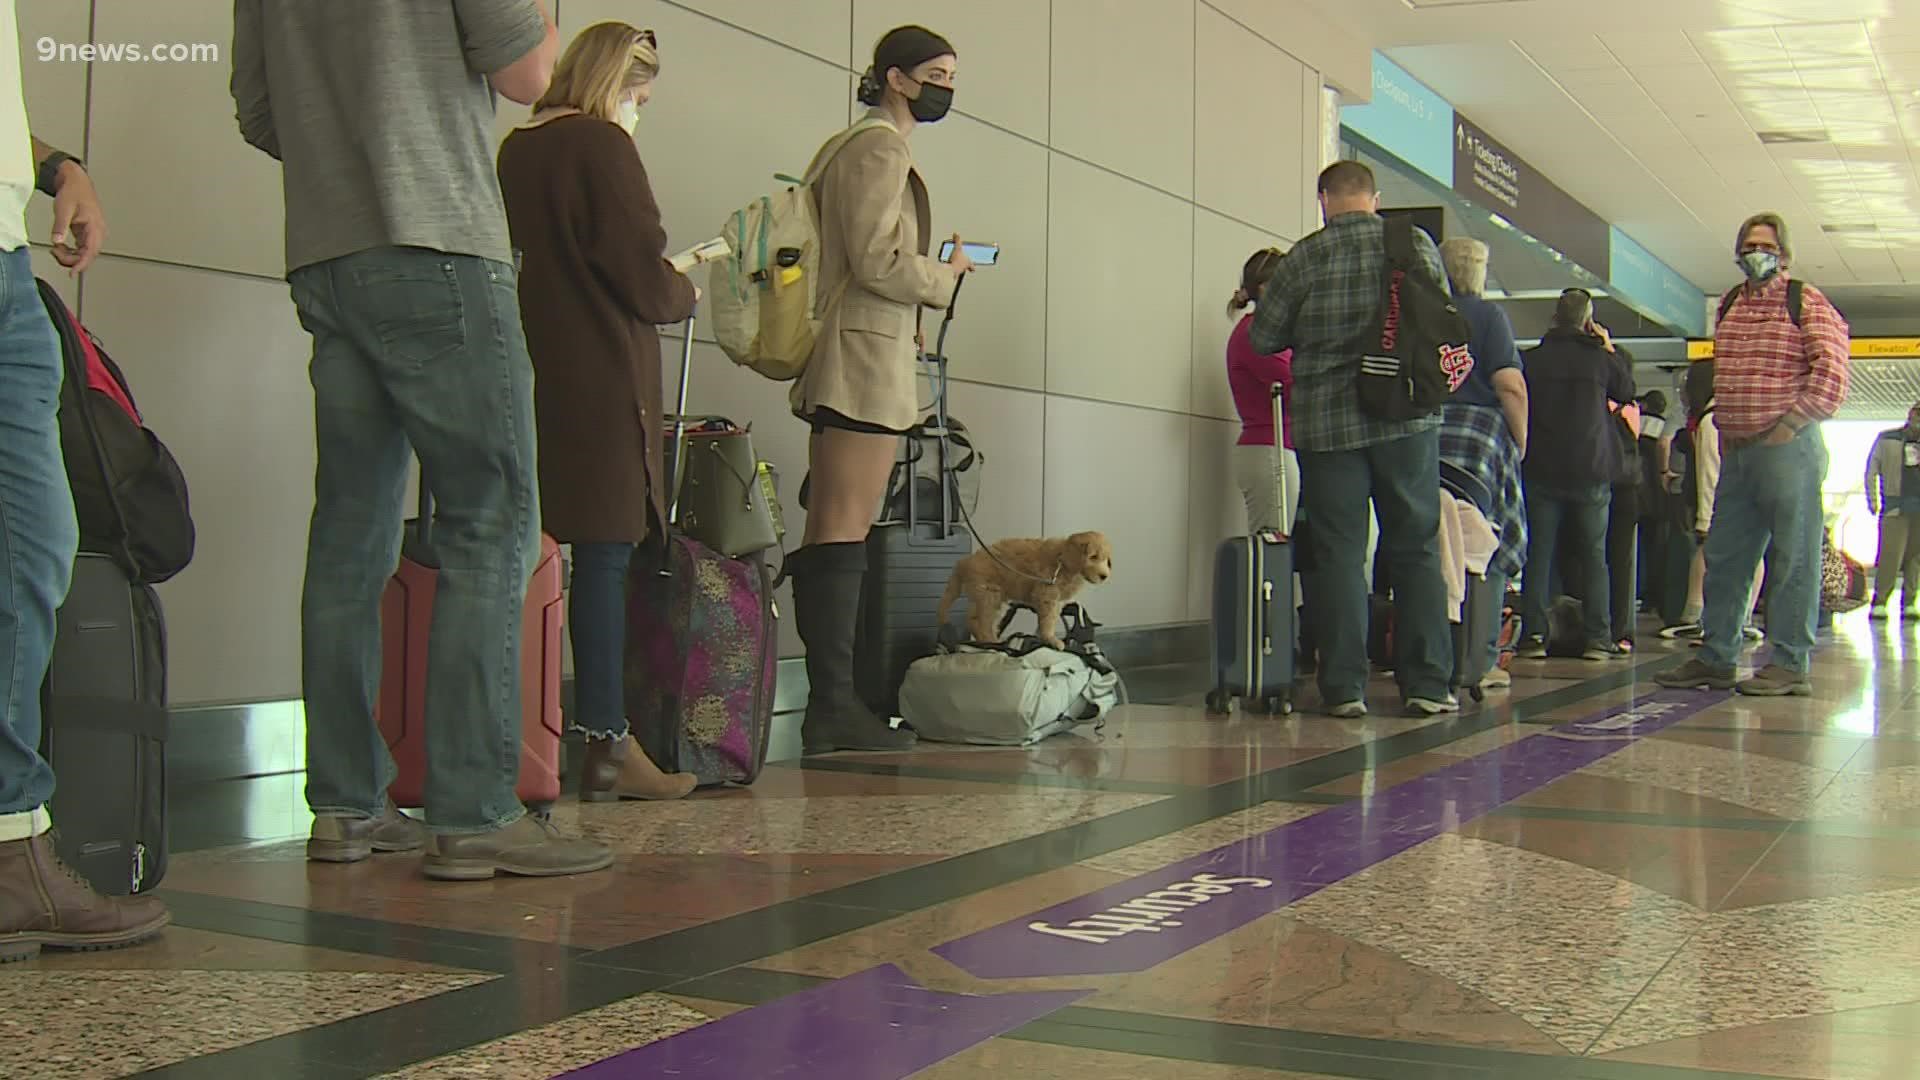 The airline canceled more than 140 flights in and out of DIA on Sunday.